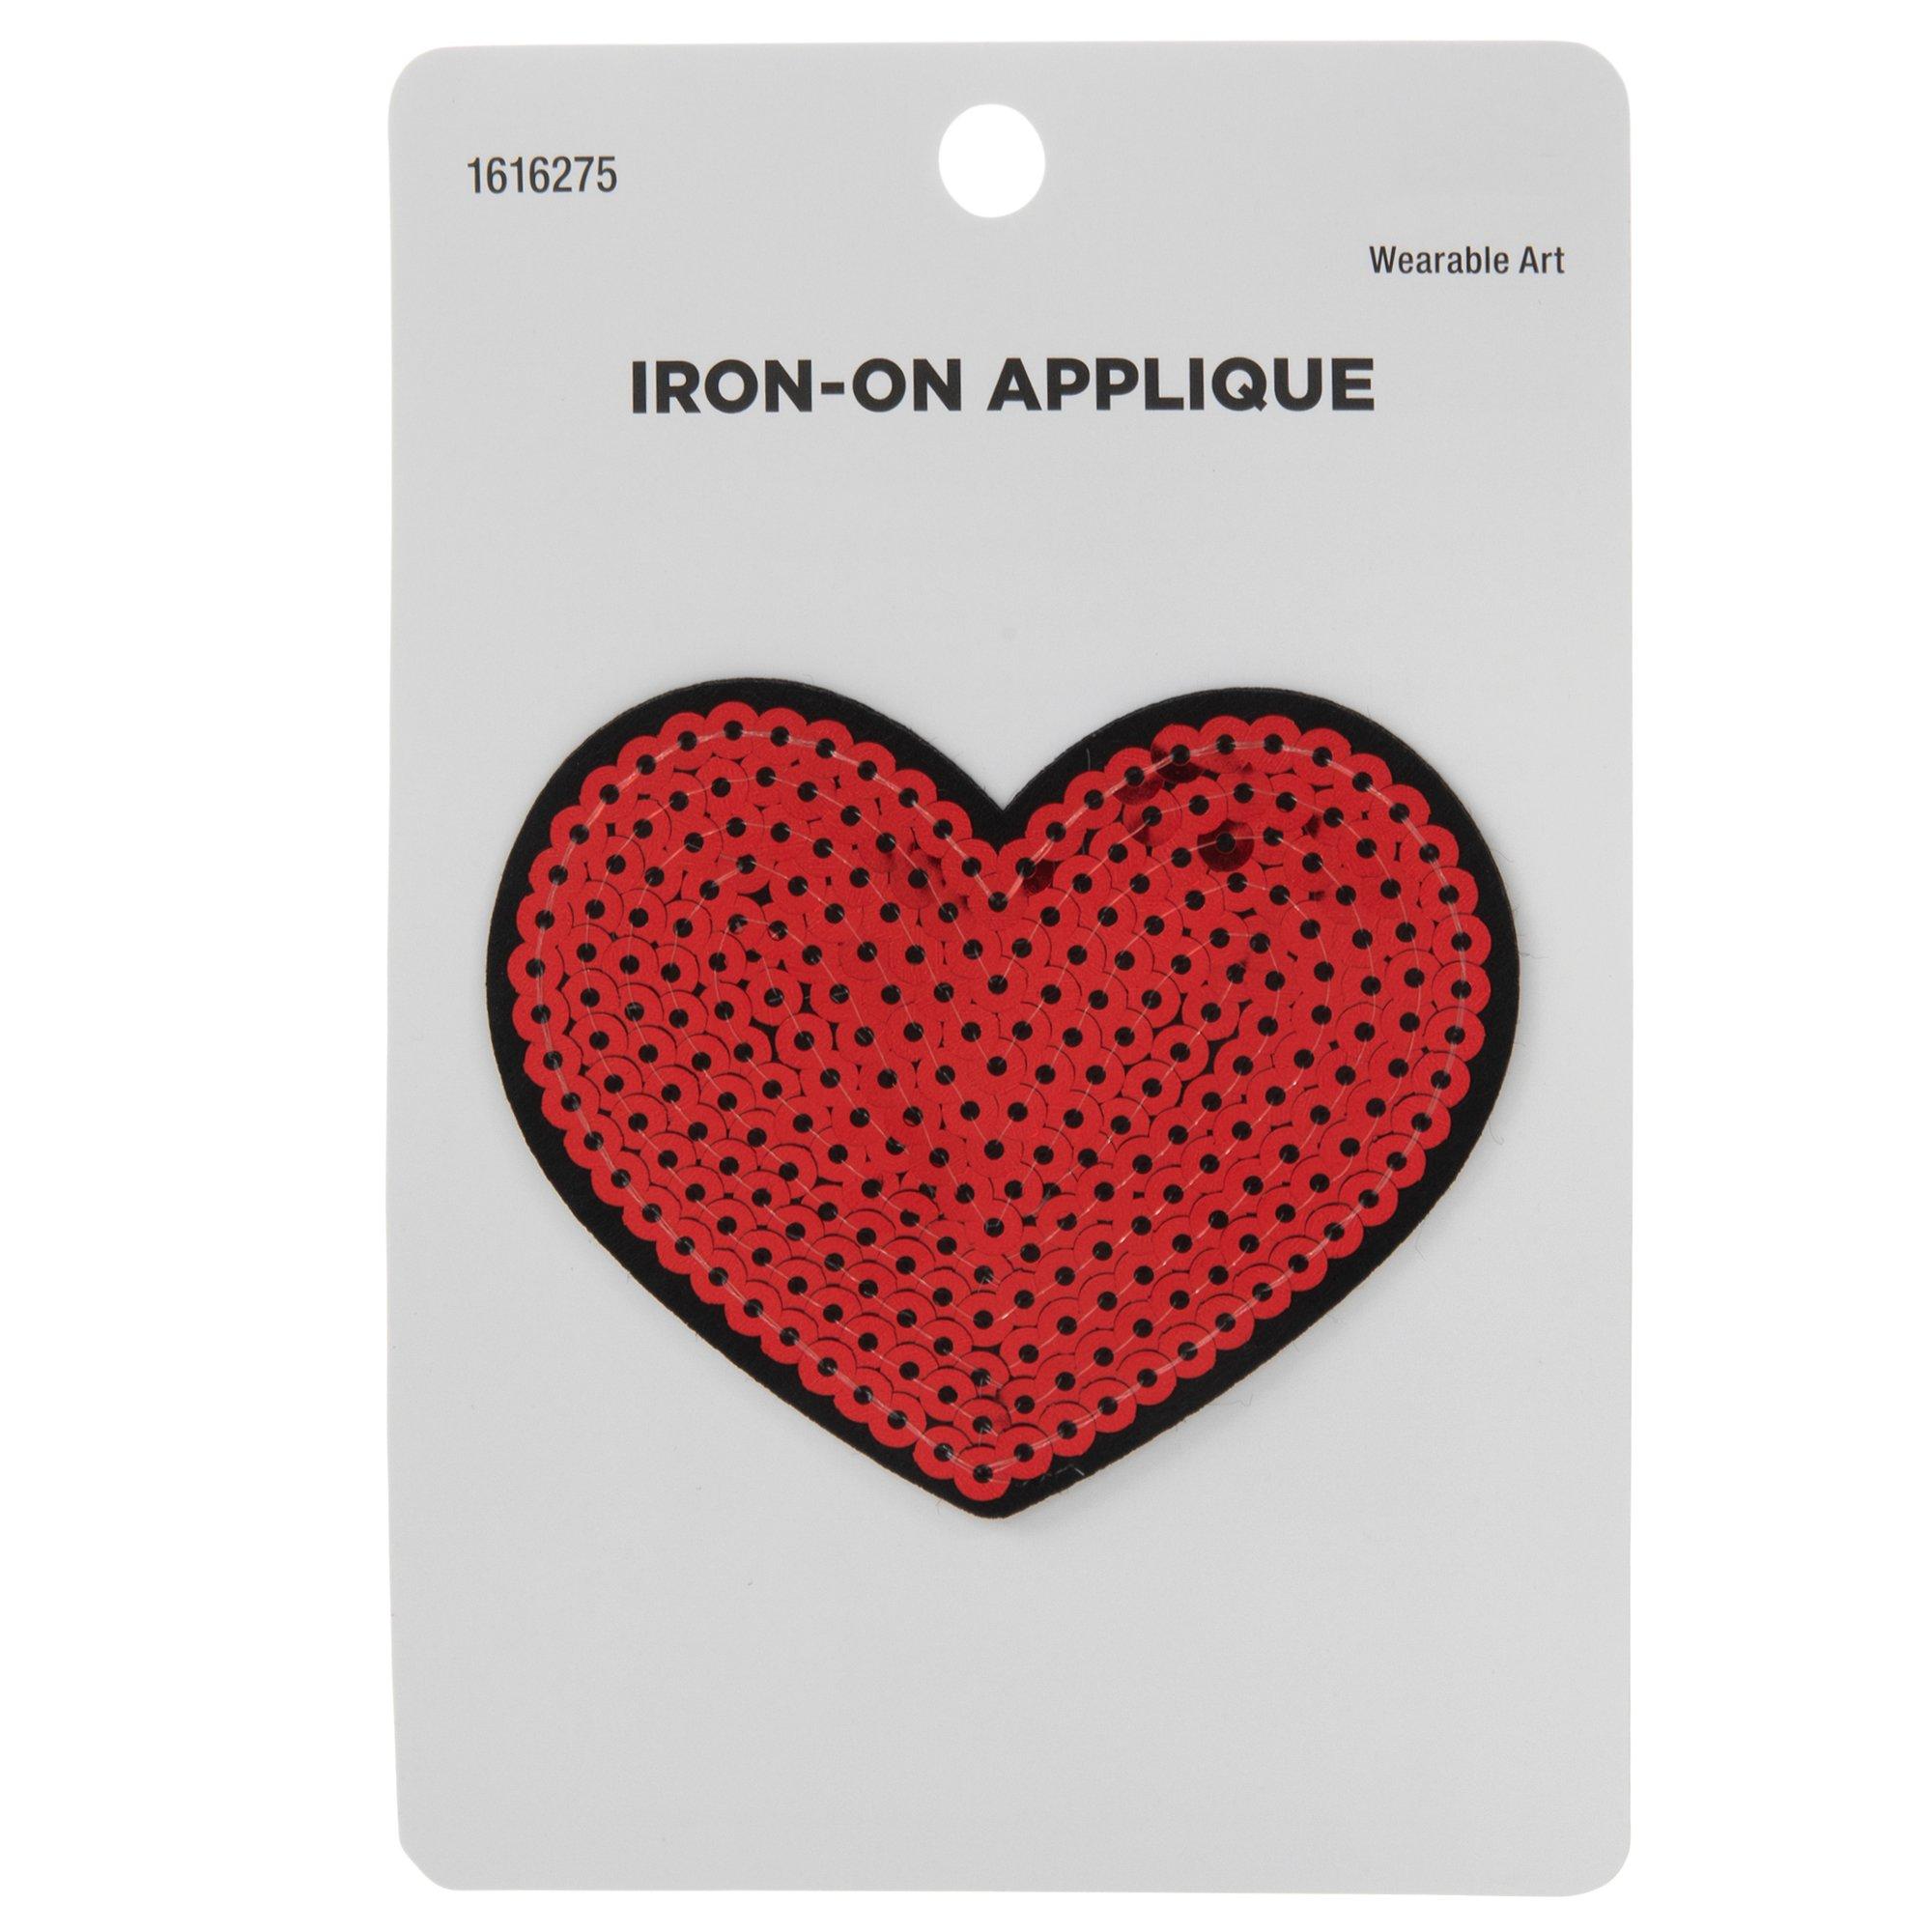 RED HEART iron-on embroidered PATCH LOVE ROMANCE VALENTINE'S DAY SOUVENIR